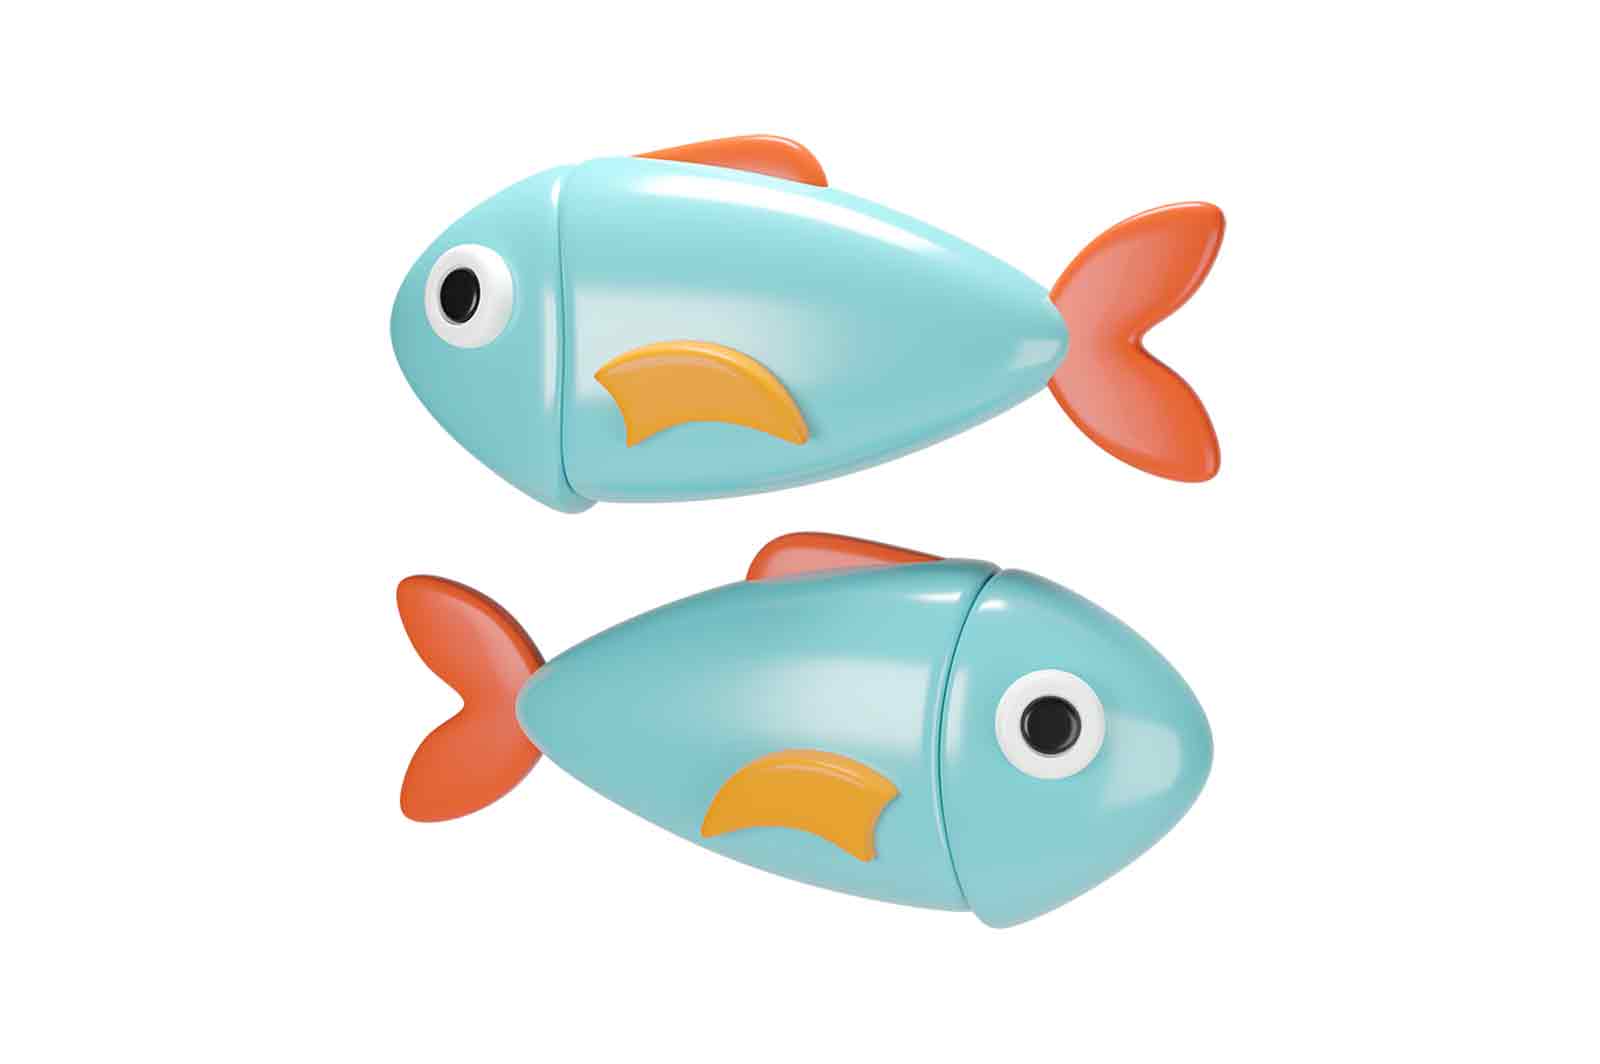 Fish, 3d rendered illustration of two identical plastic toys in light blue and orange colors.